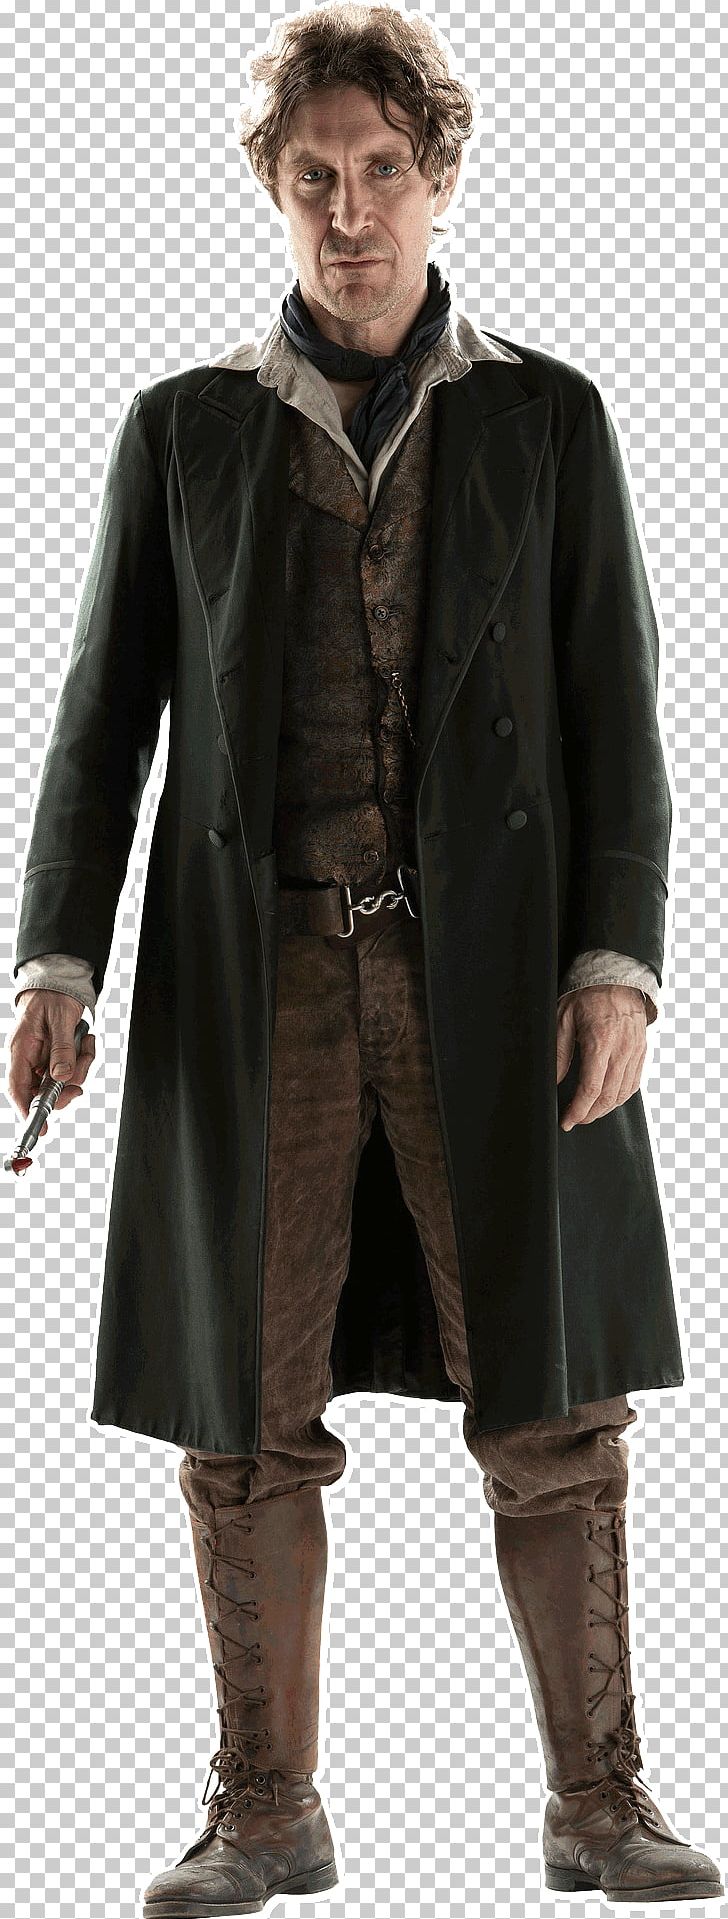 Paul McGann Eighth Doctor Doctor Who Tenth Doctor PNG, Clipart, Coat, Companion, Costume, Day Of The Doctor, Doctor Free PNG Download